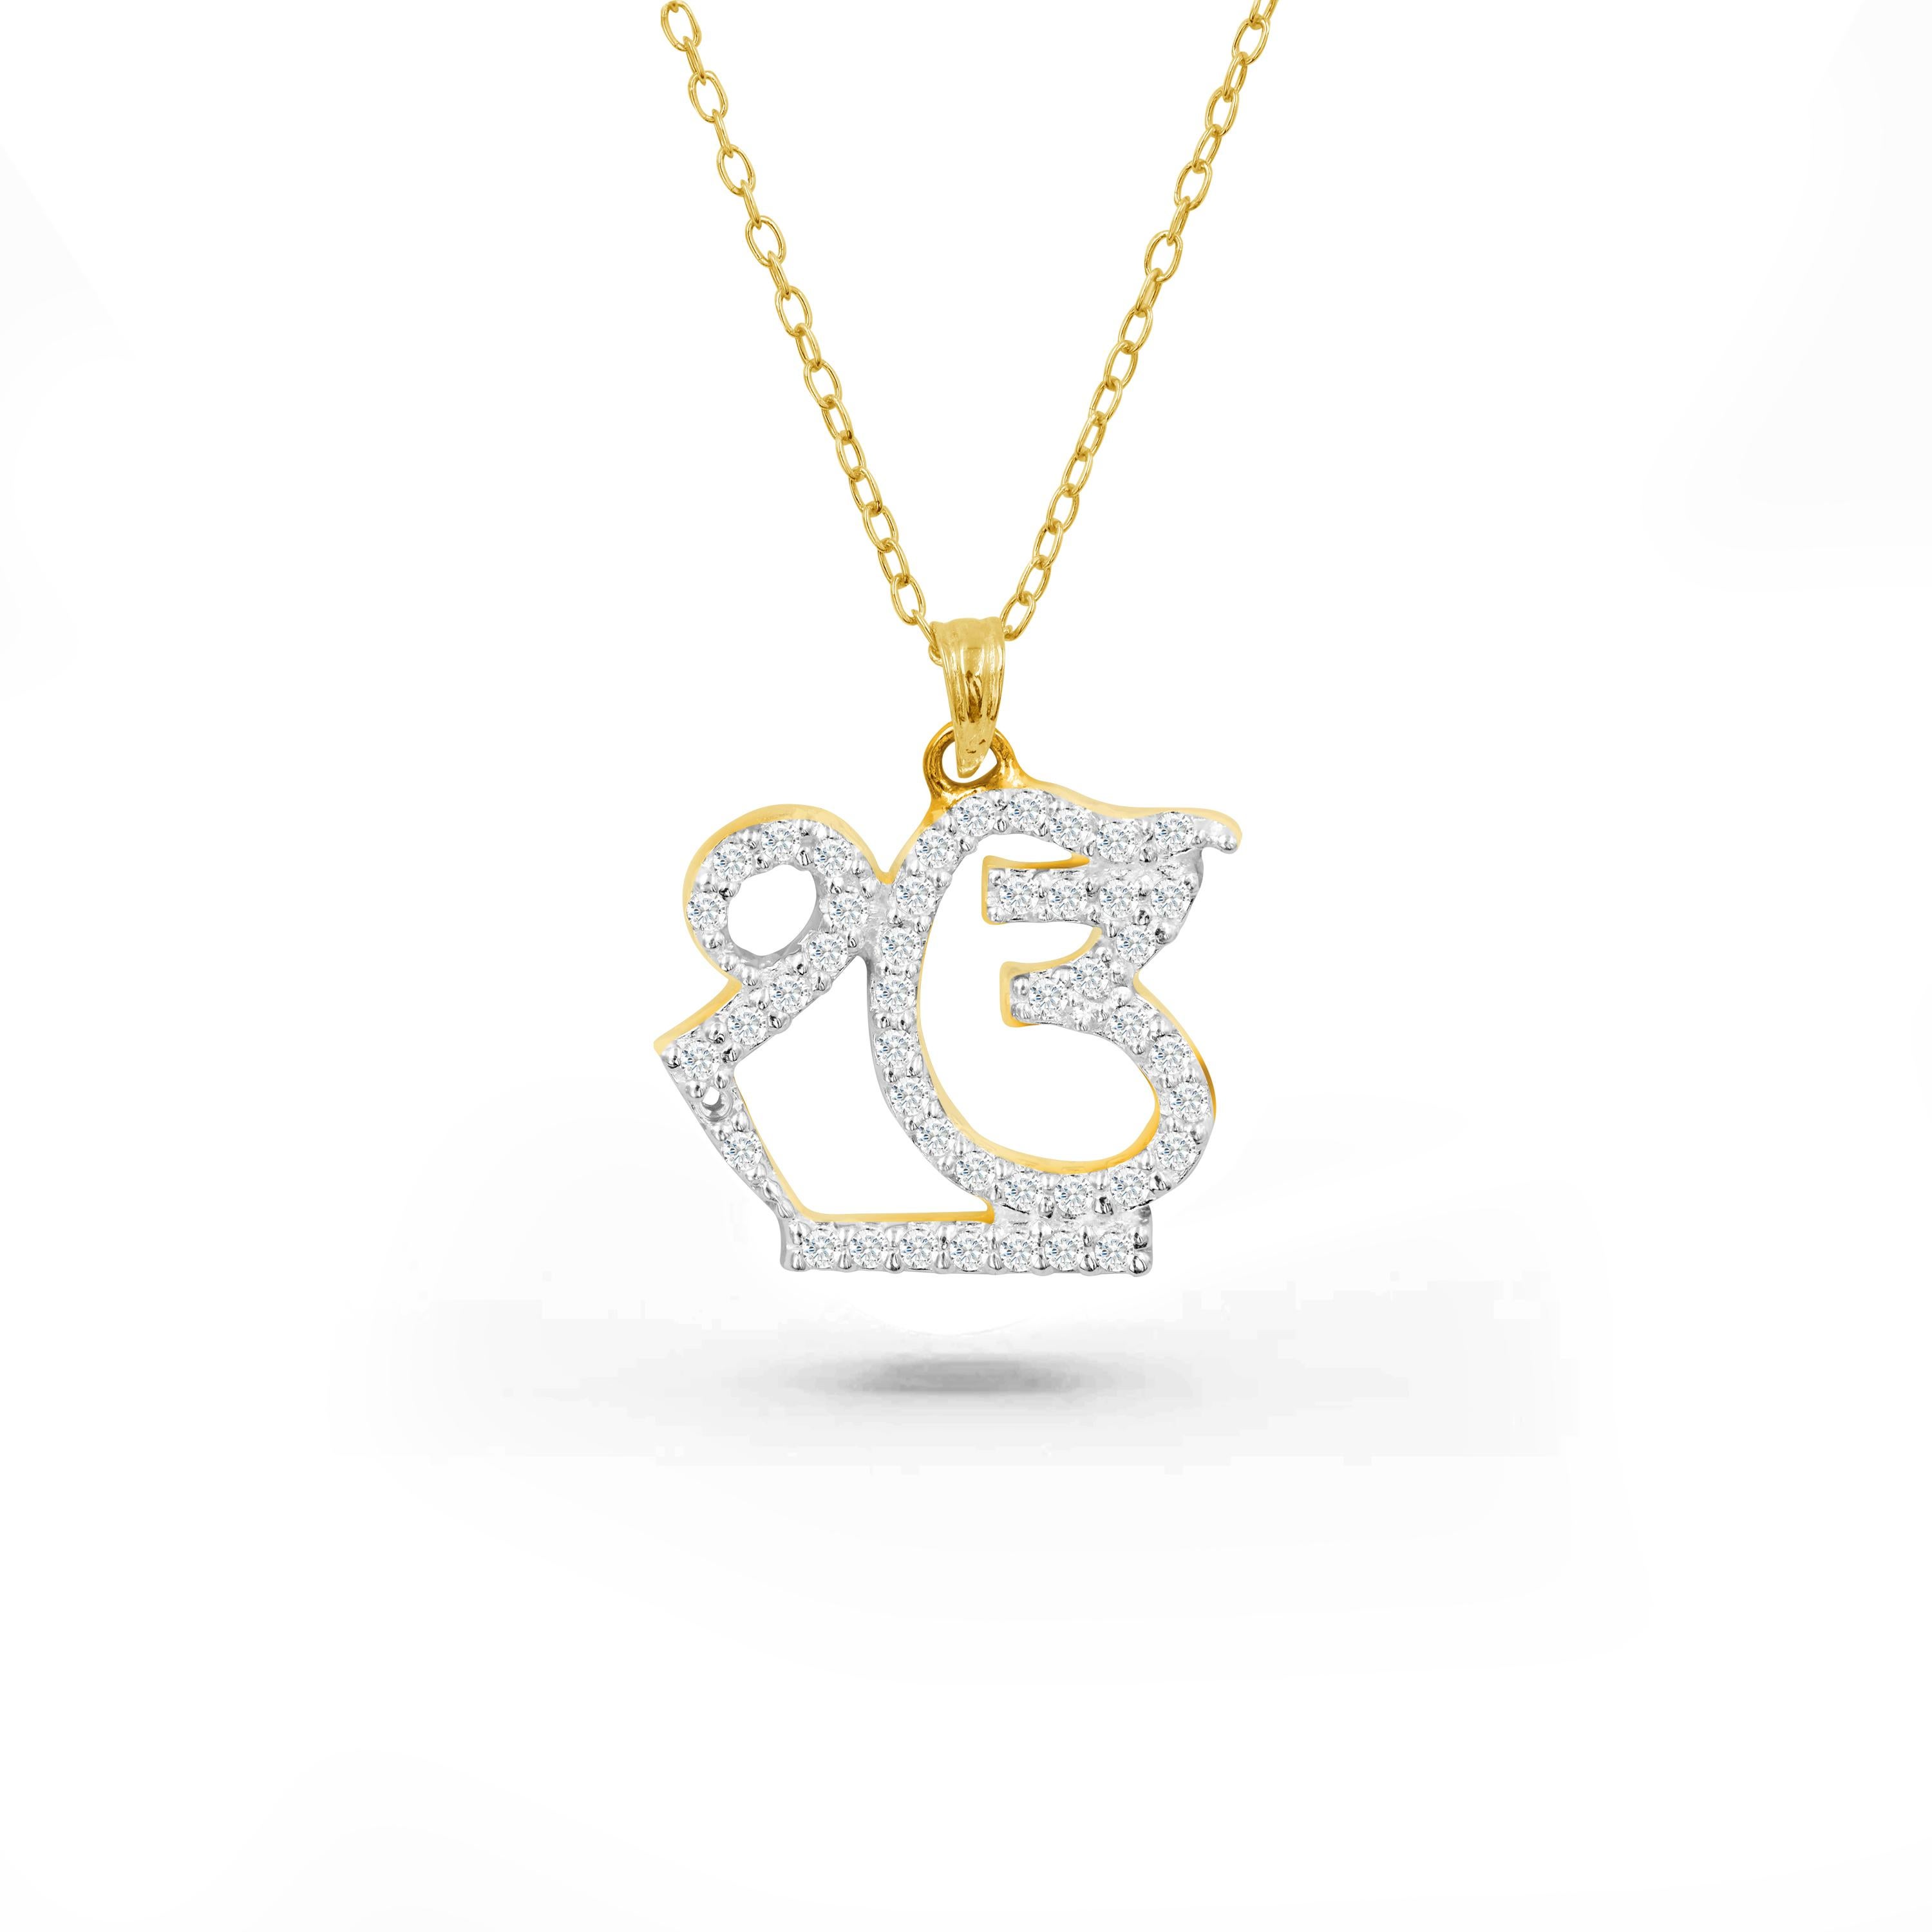 The Handcrafted Ik Onkar diamond necklace is perfect everyday wear to bring inner peace and spirituality. This beautiful sikhism religious necklace is a statement piece. This sikhism necklace can be customized on the gold color and karat of your